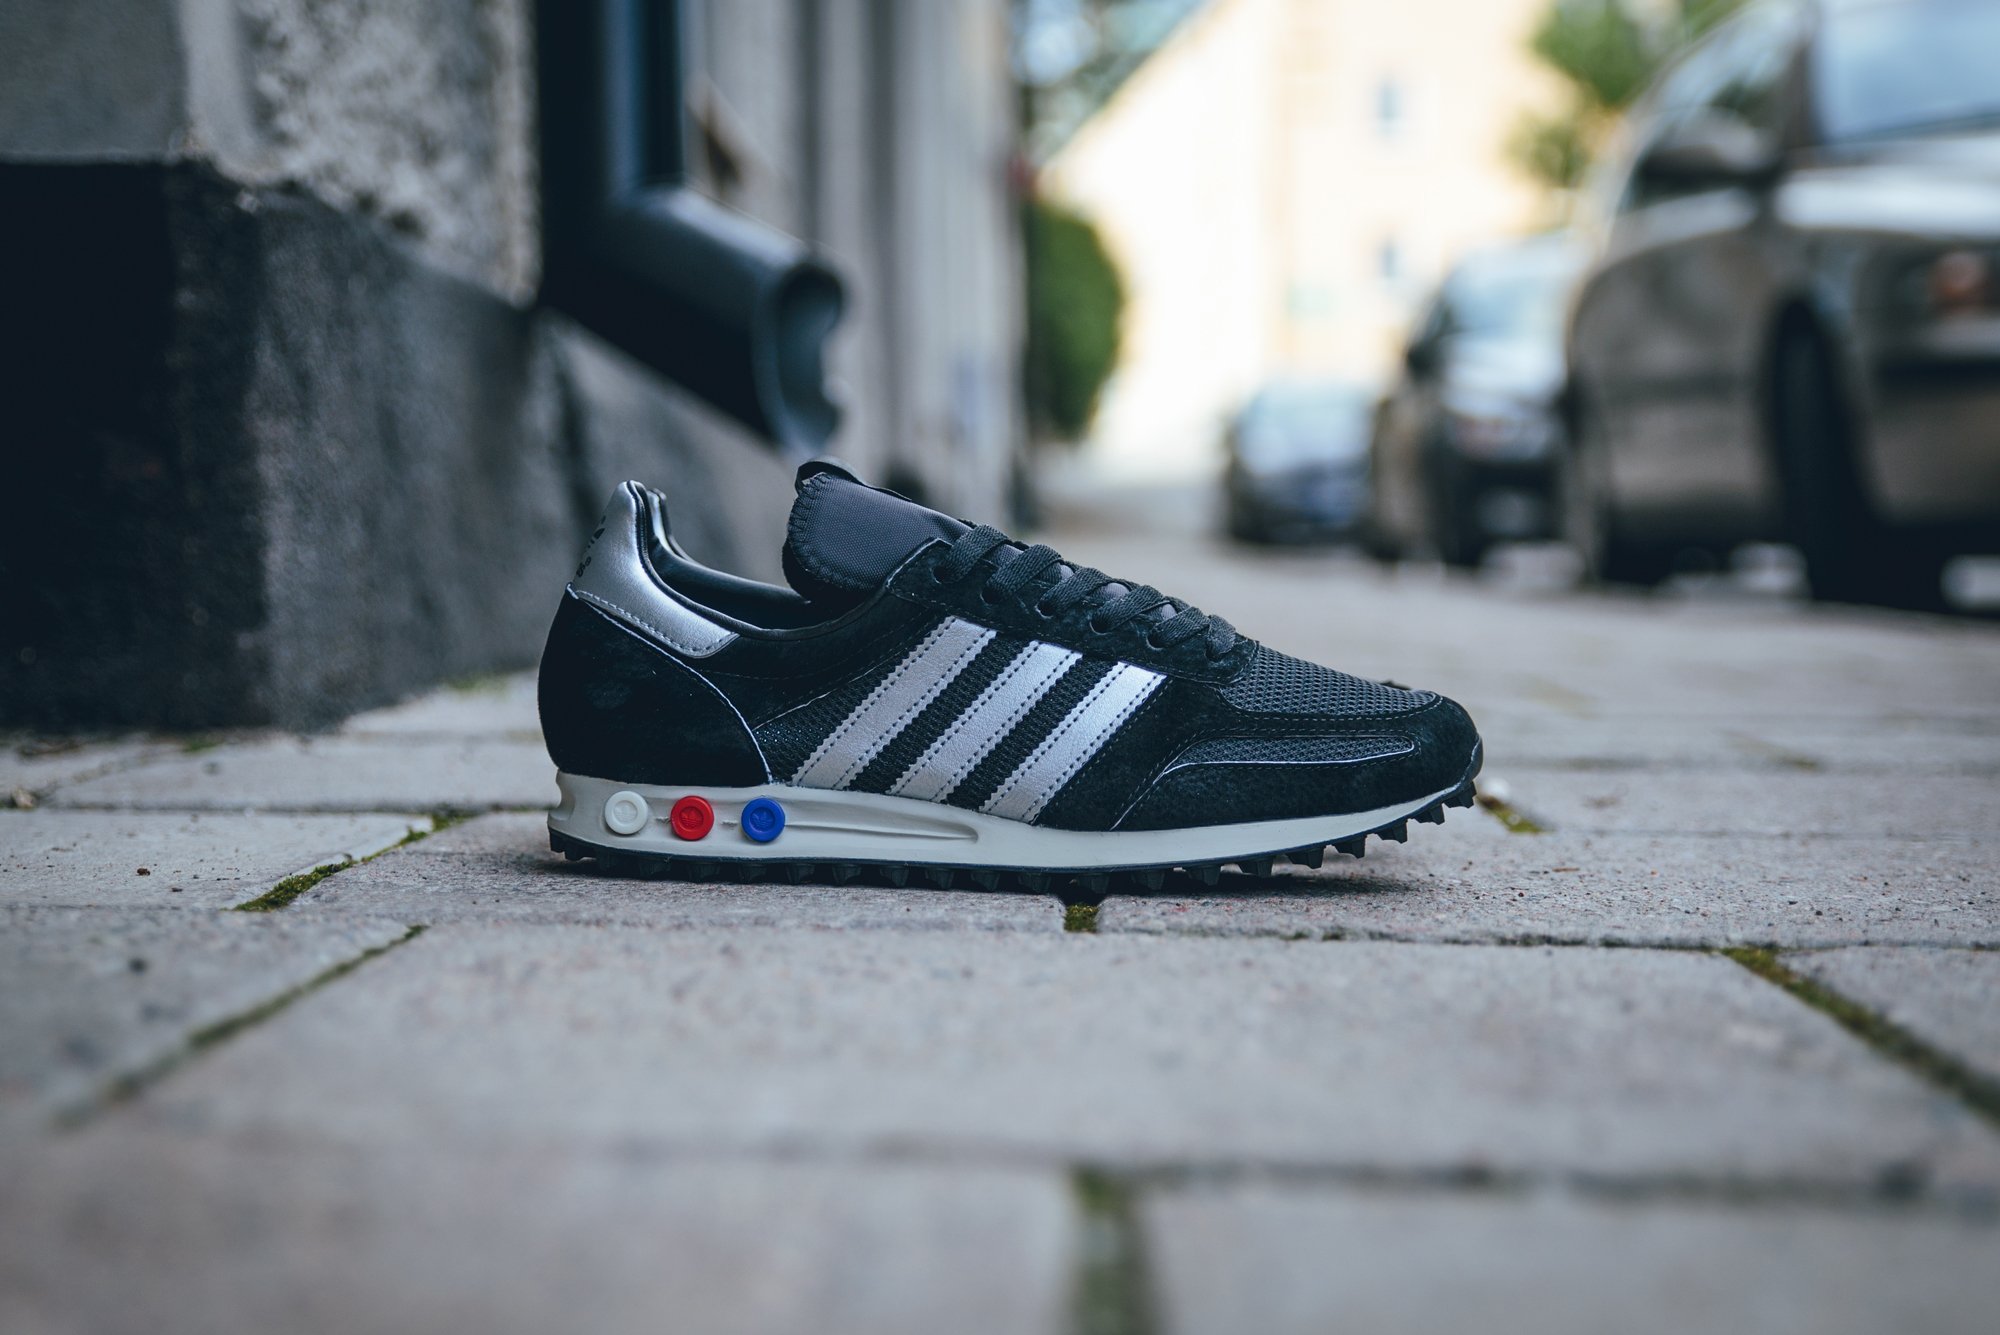 rastro canción Paseo SNS on Twitter: "The adidas LA Trainer OG Made in Germany drops tomorrow!  More info: https://t.co/oqOZpYhbYm https://t.co/PcQkGmzI3M" / Twitter